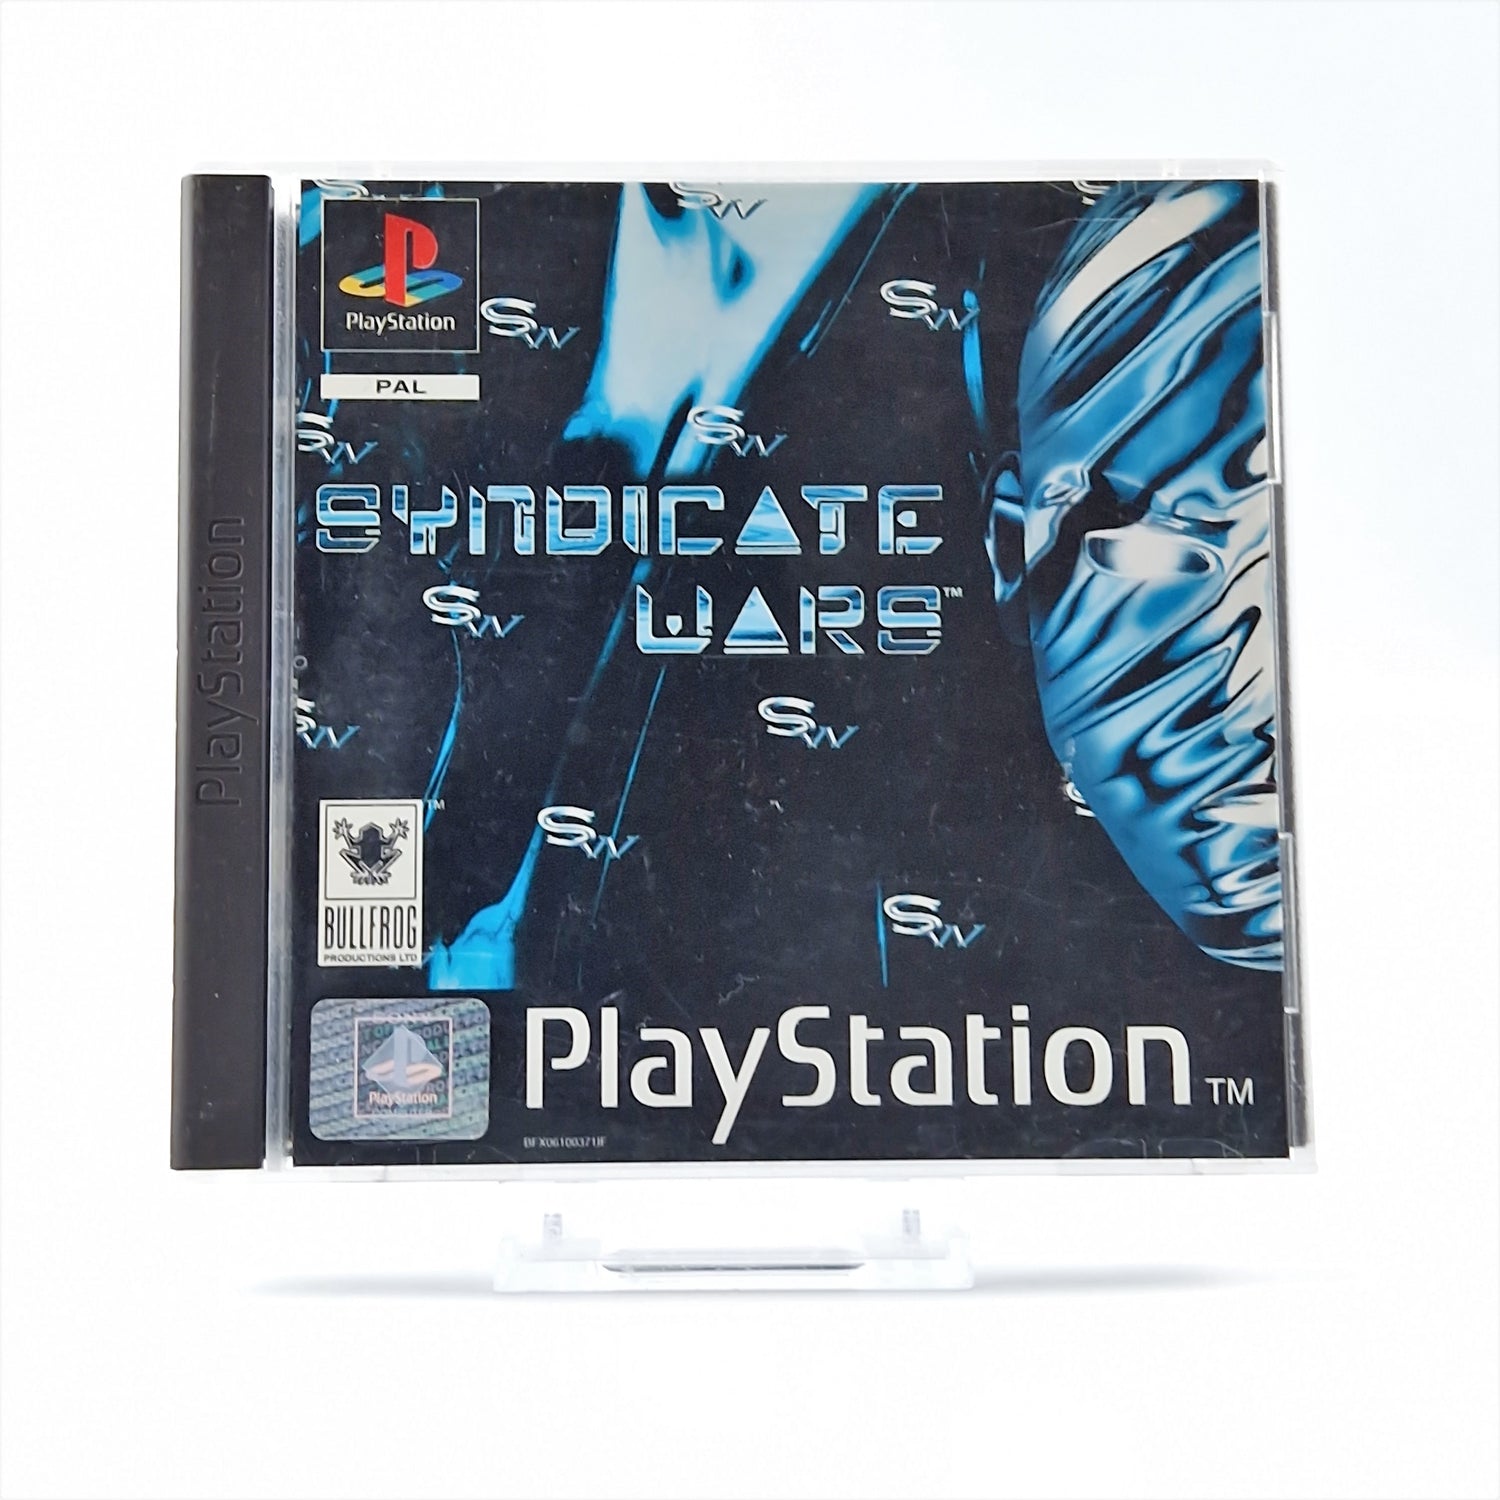 Playstation 1 Spiel : Syndicate Wars - Sony PS1 PSX / OVP Anleitung CD PAL